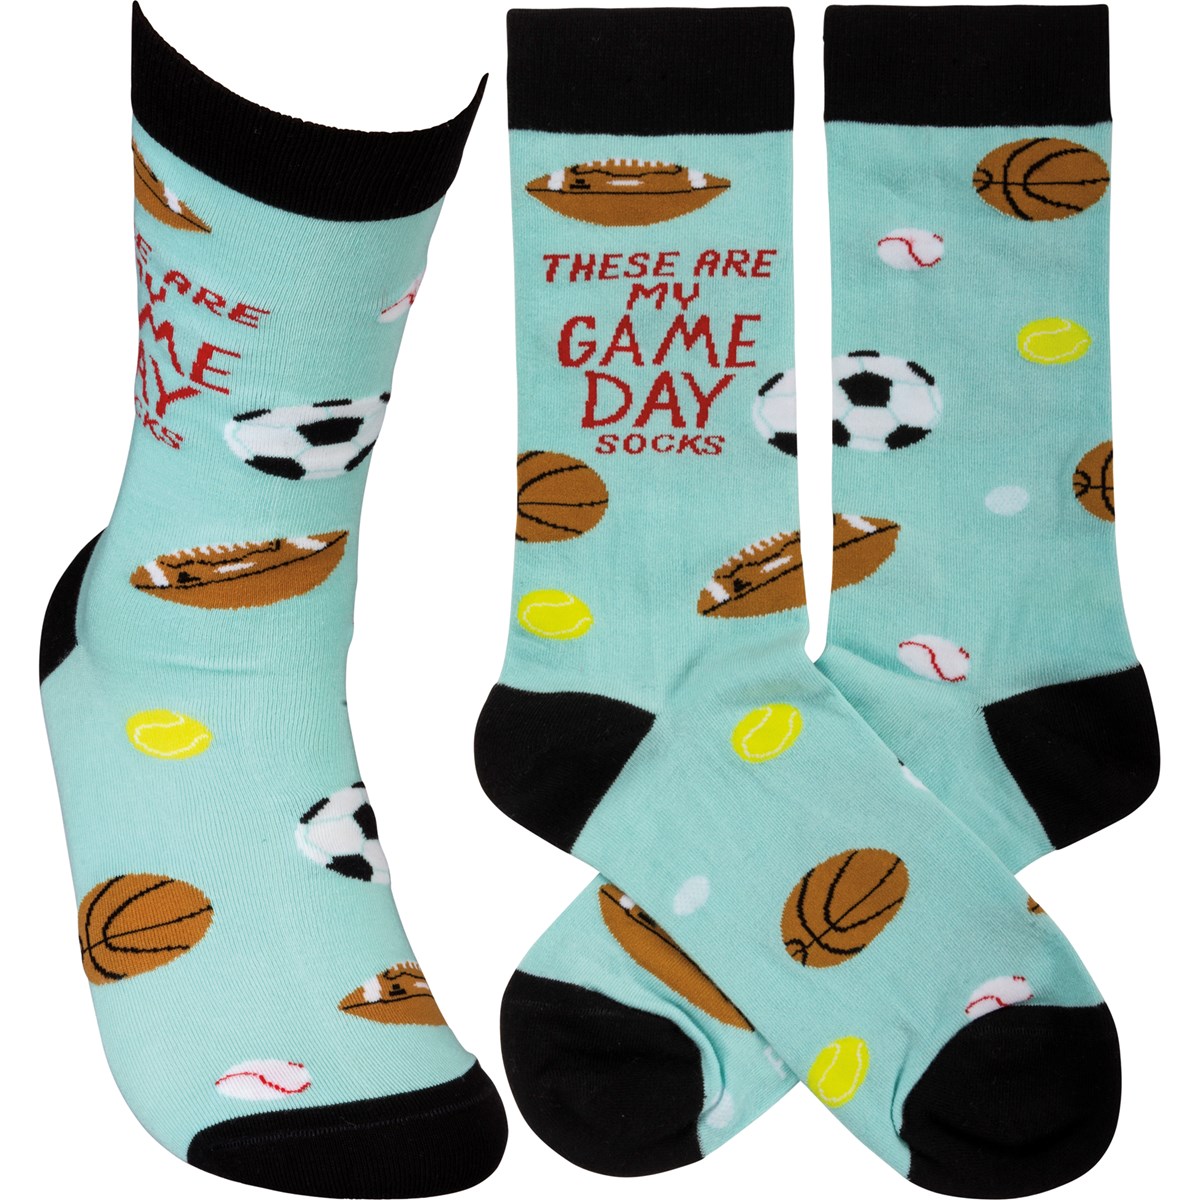 These Are My Game Day Socks - Cotton, Nylon, Spandex